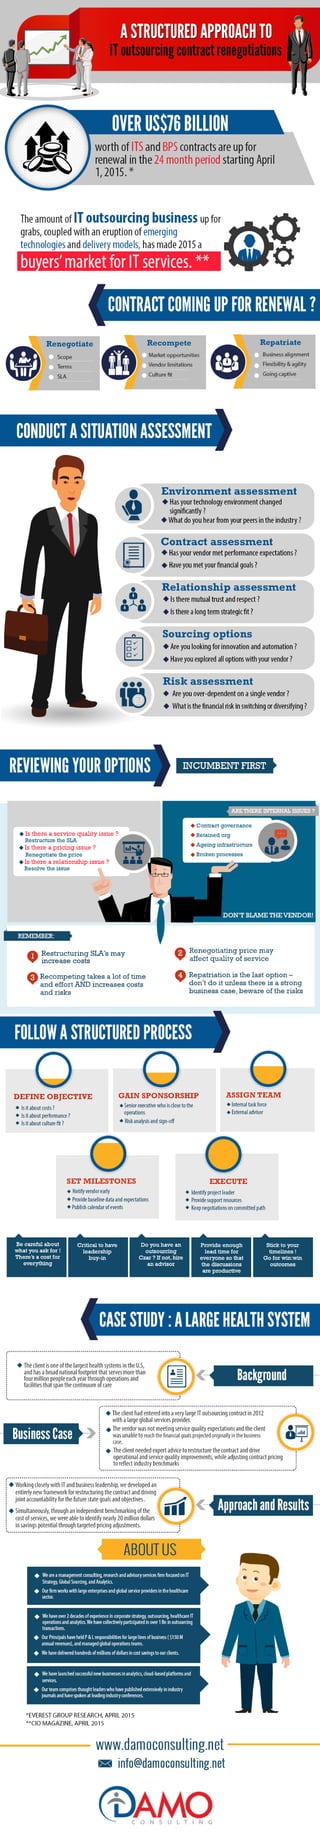 IT Outsourcing Contract Renegotiation (infographic)